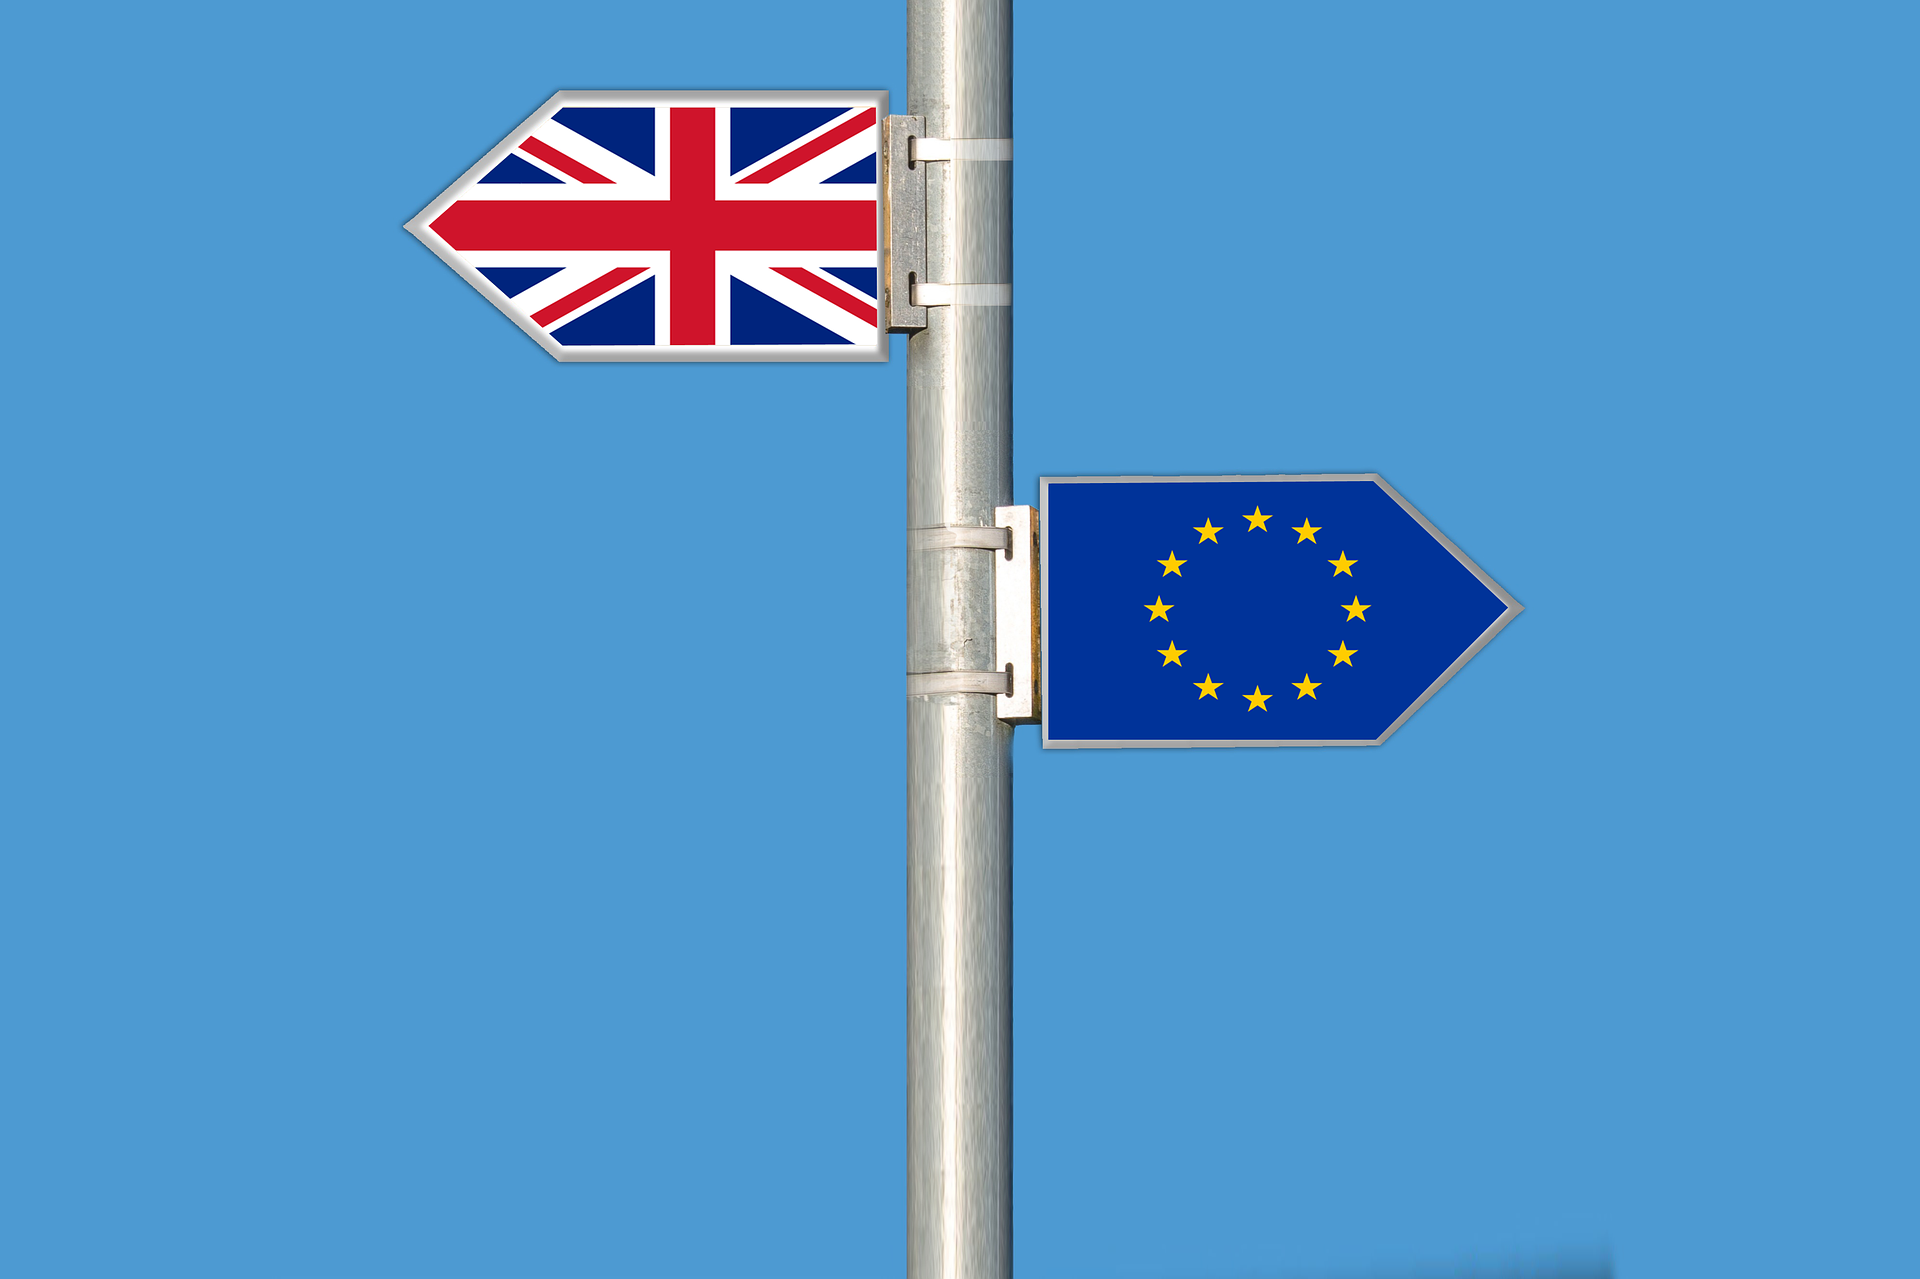 a sign post with one sign showing the British flag and one flag showing the EU flag